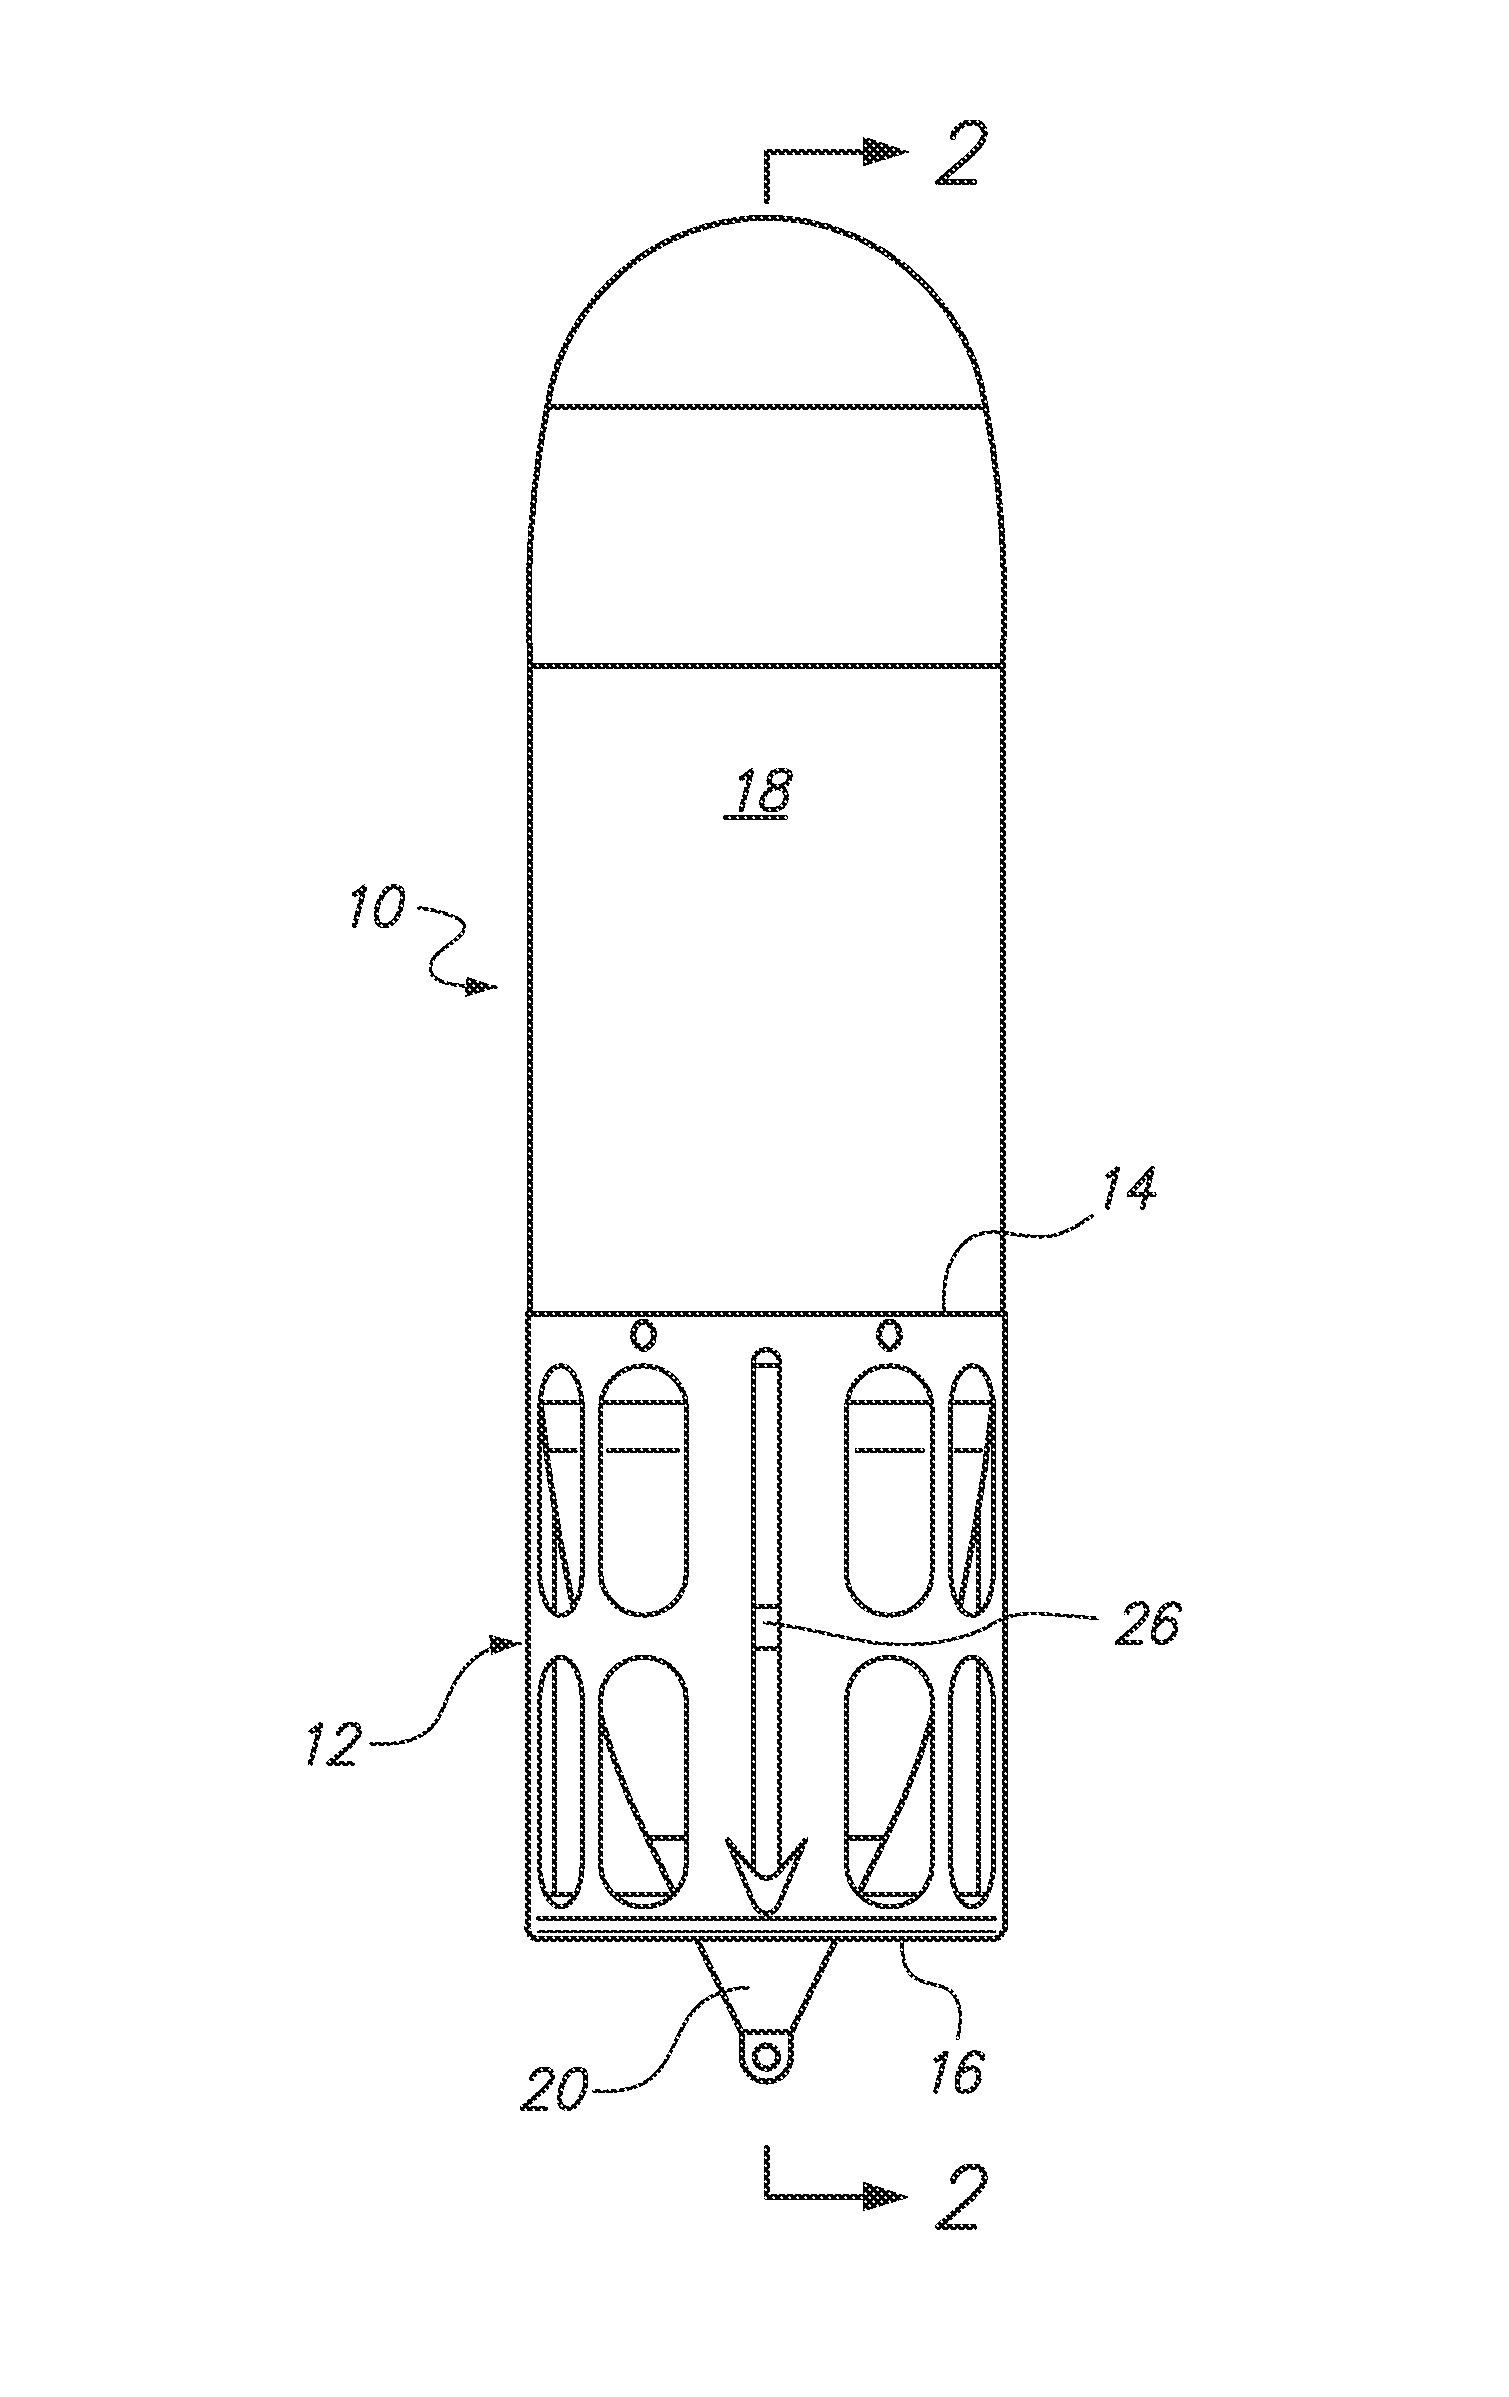 Self-stabilizing buoy and deployment methods